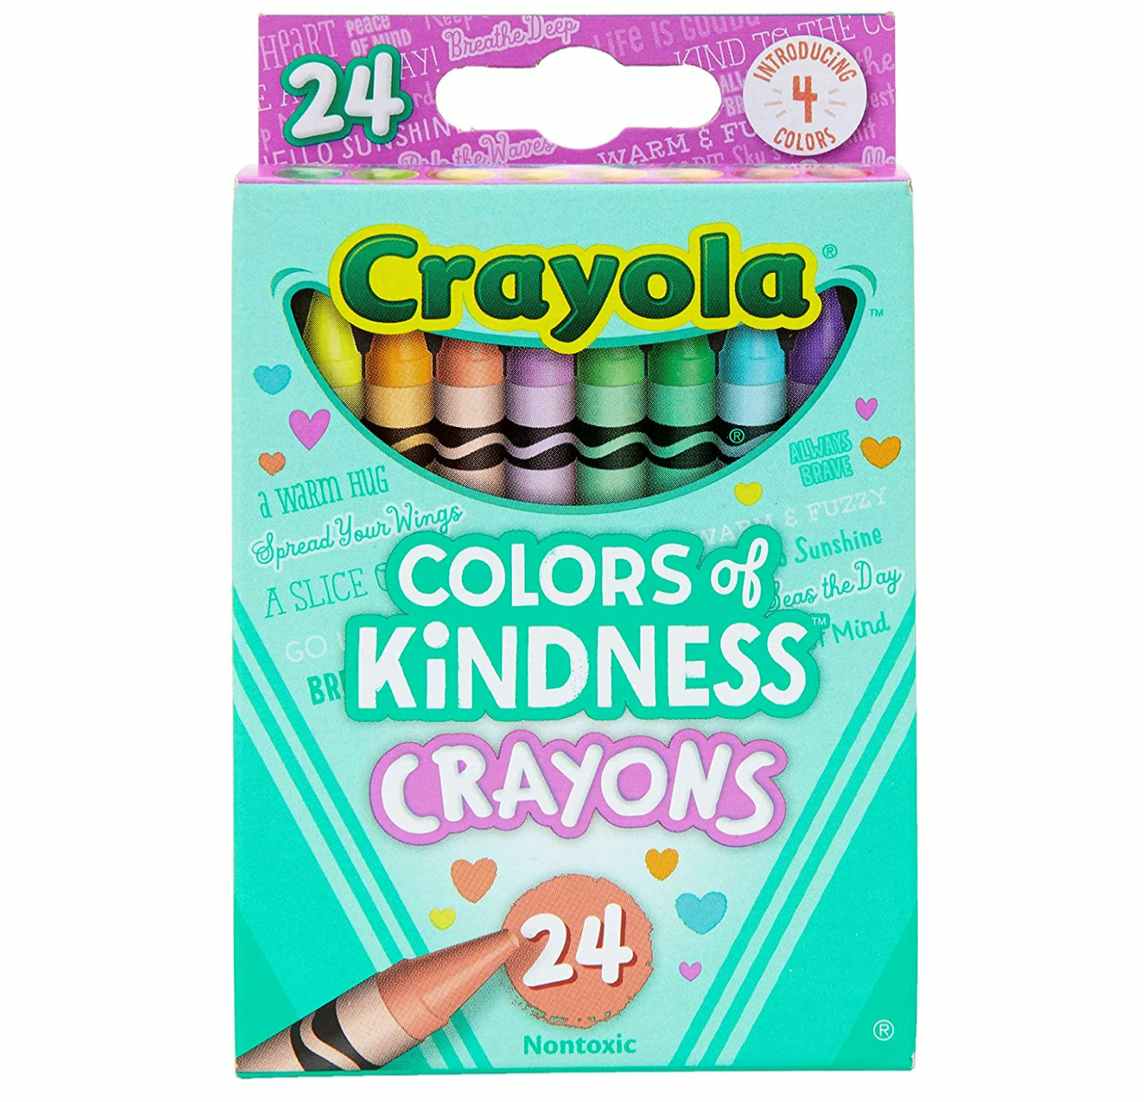 A box of special edition crayons